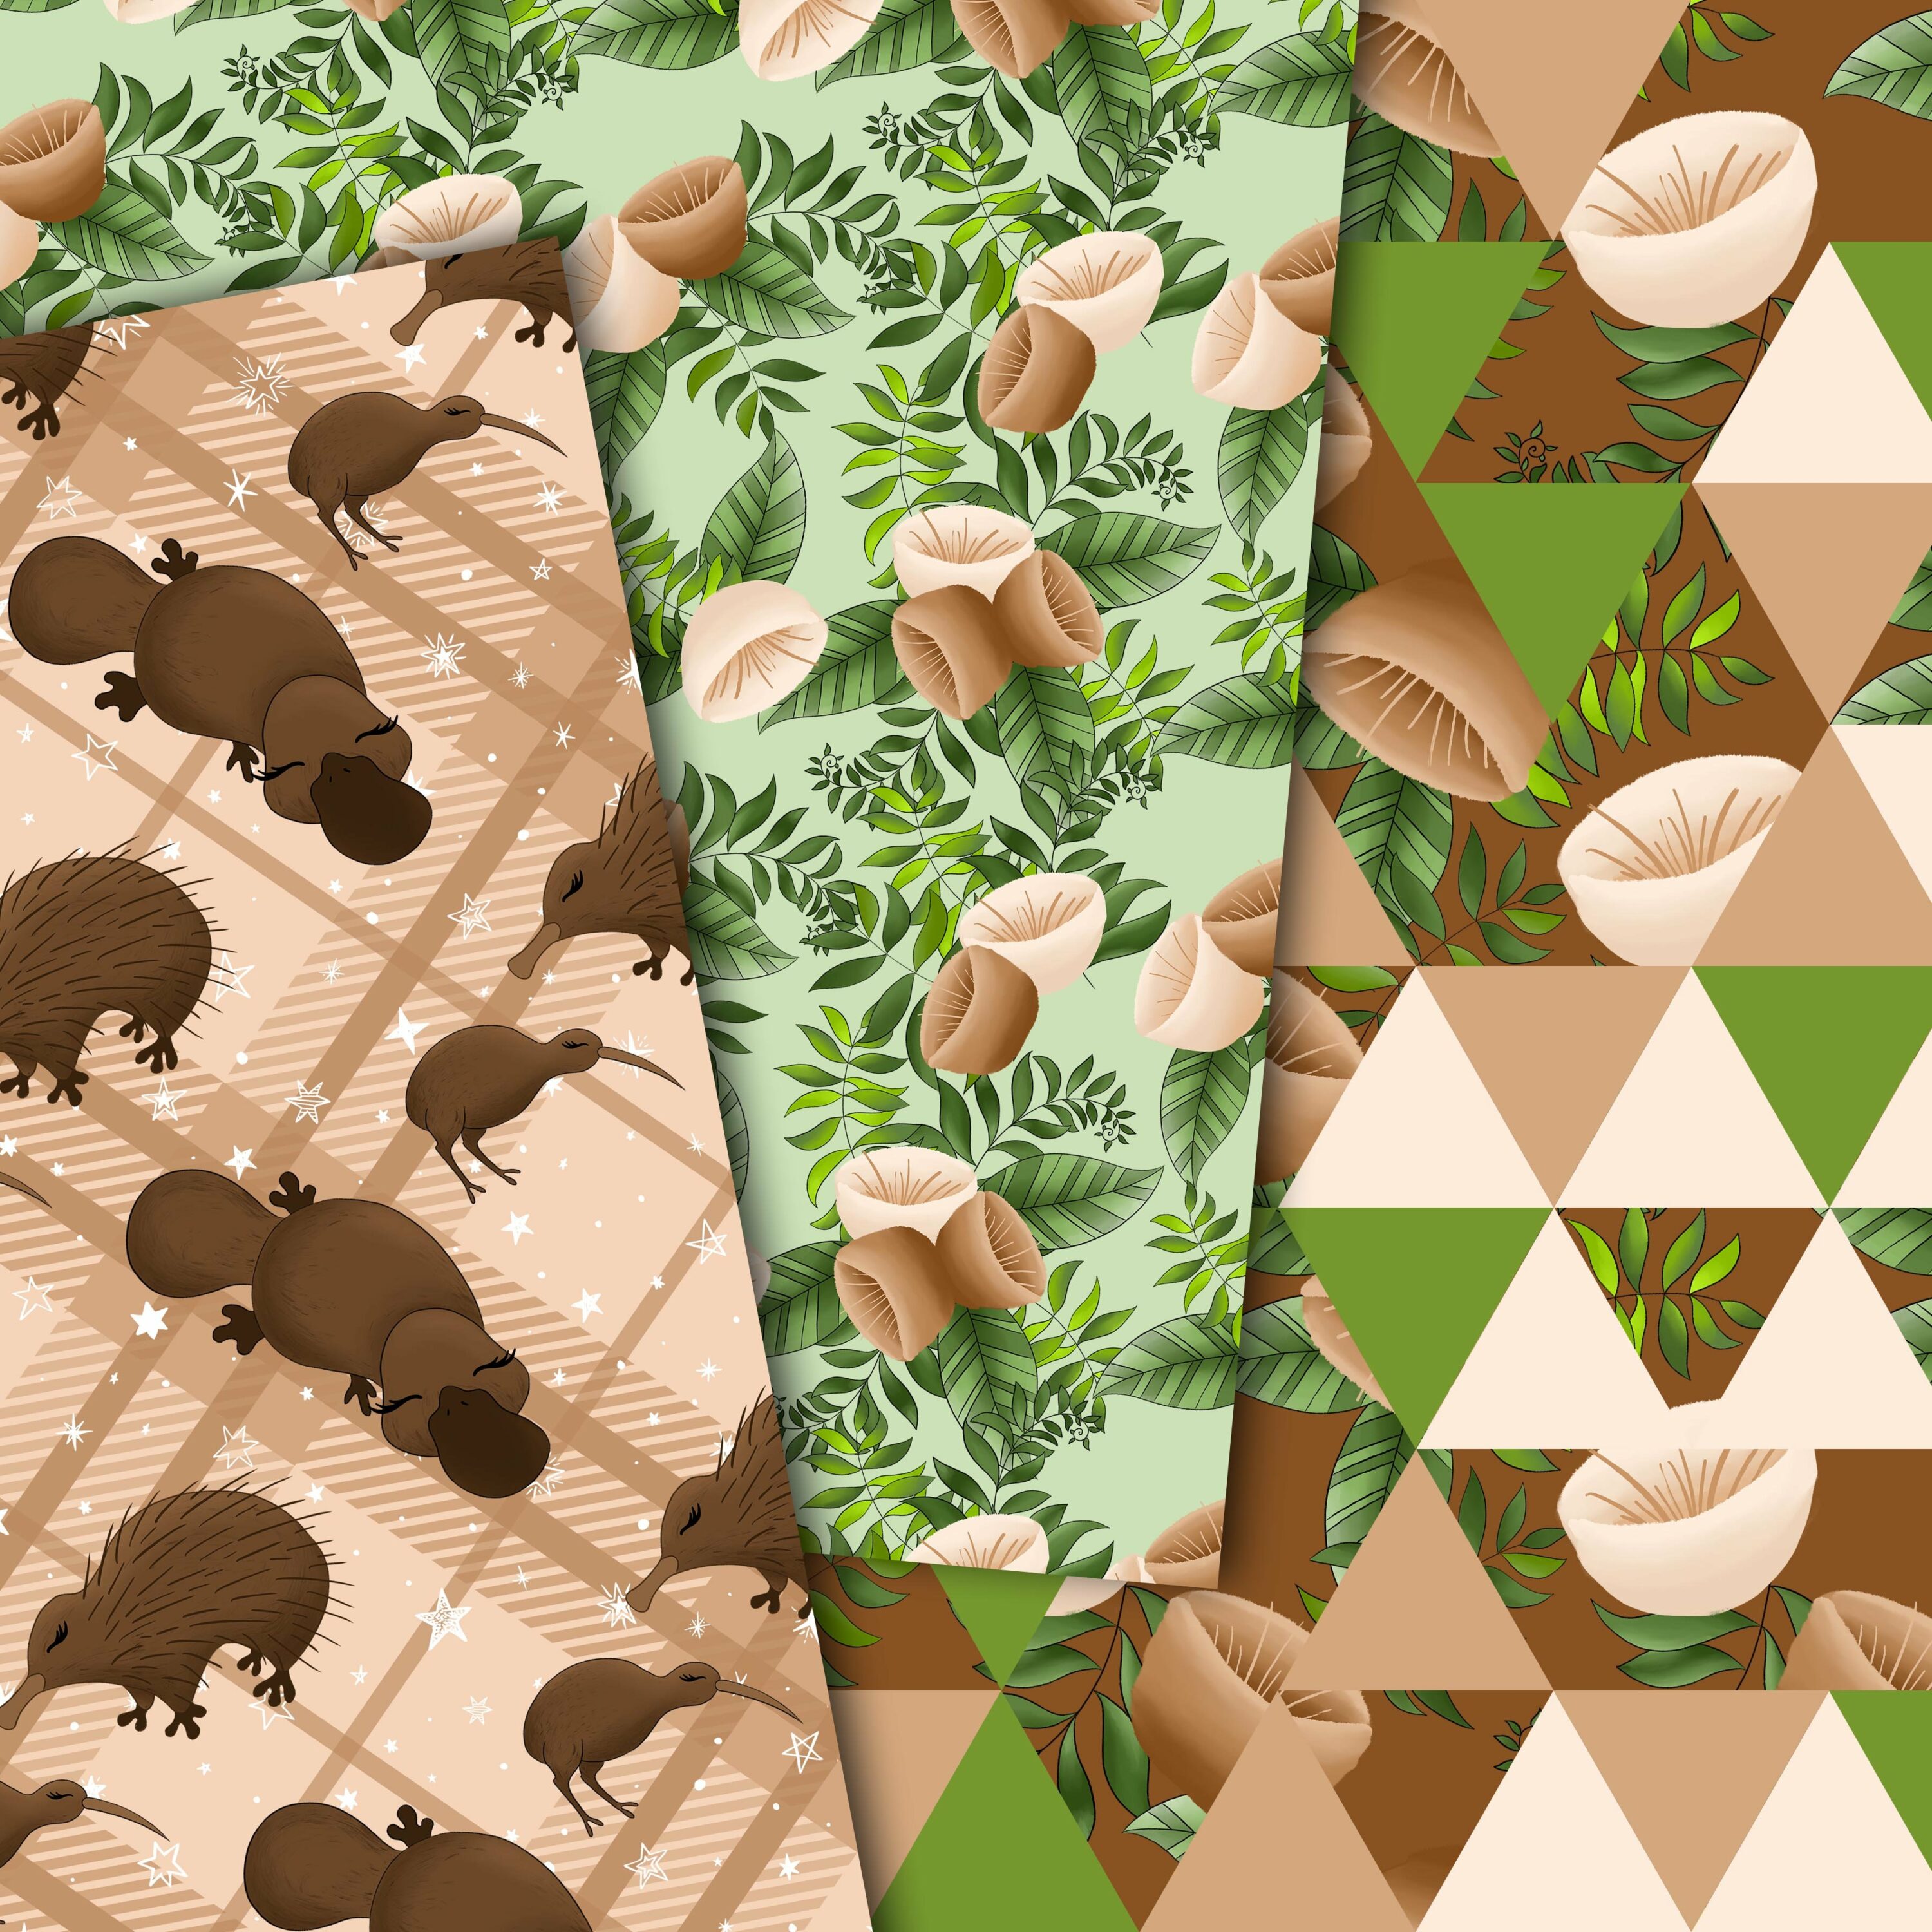 Nice green and brown patterns collection with the animals and nuts.